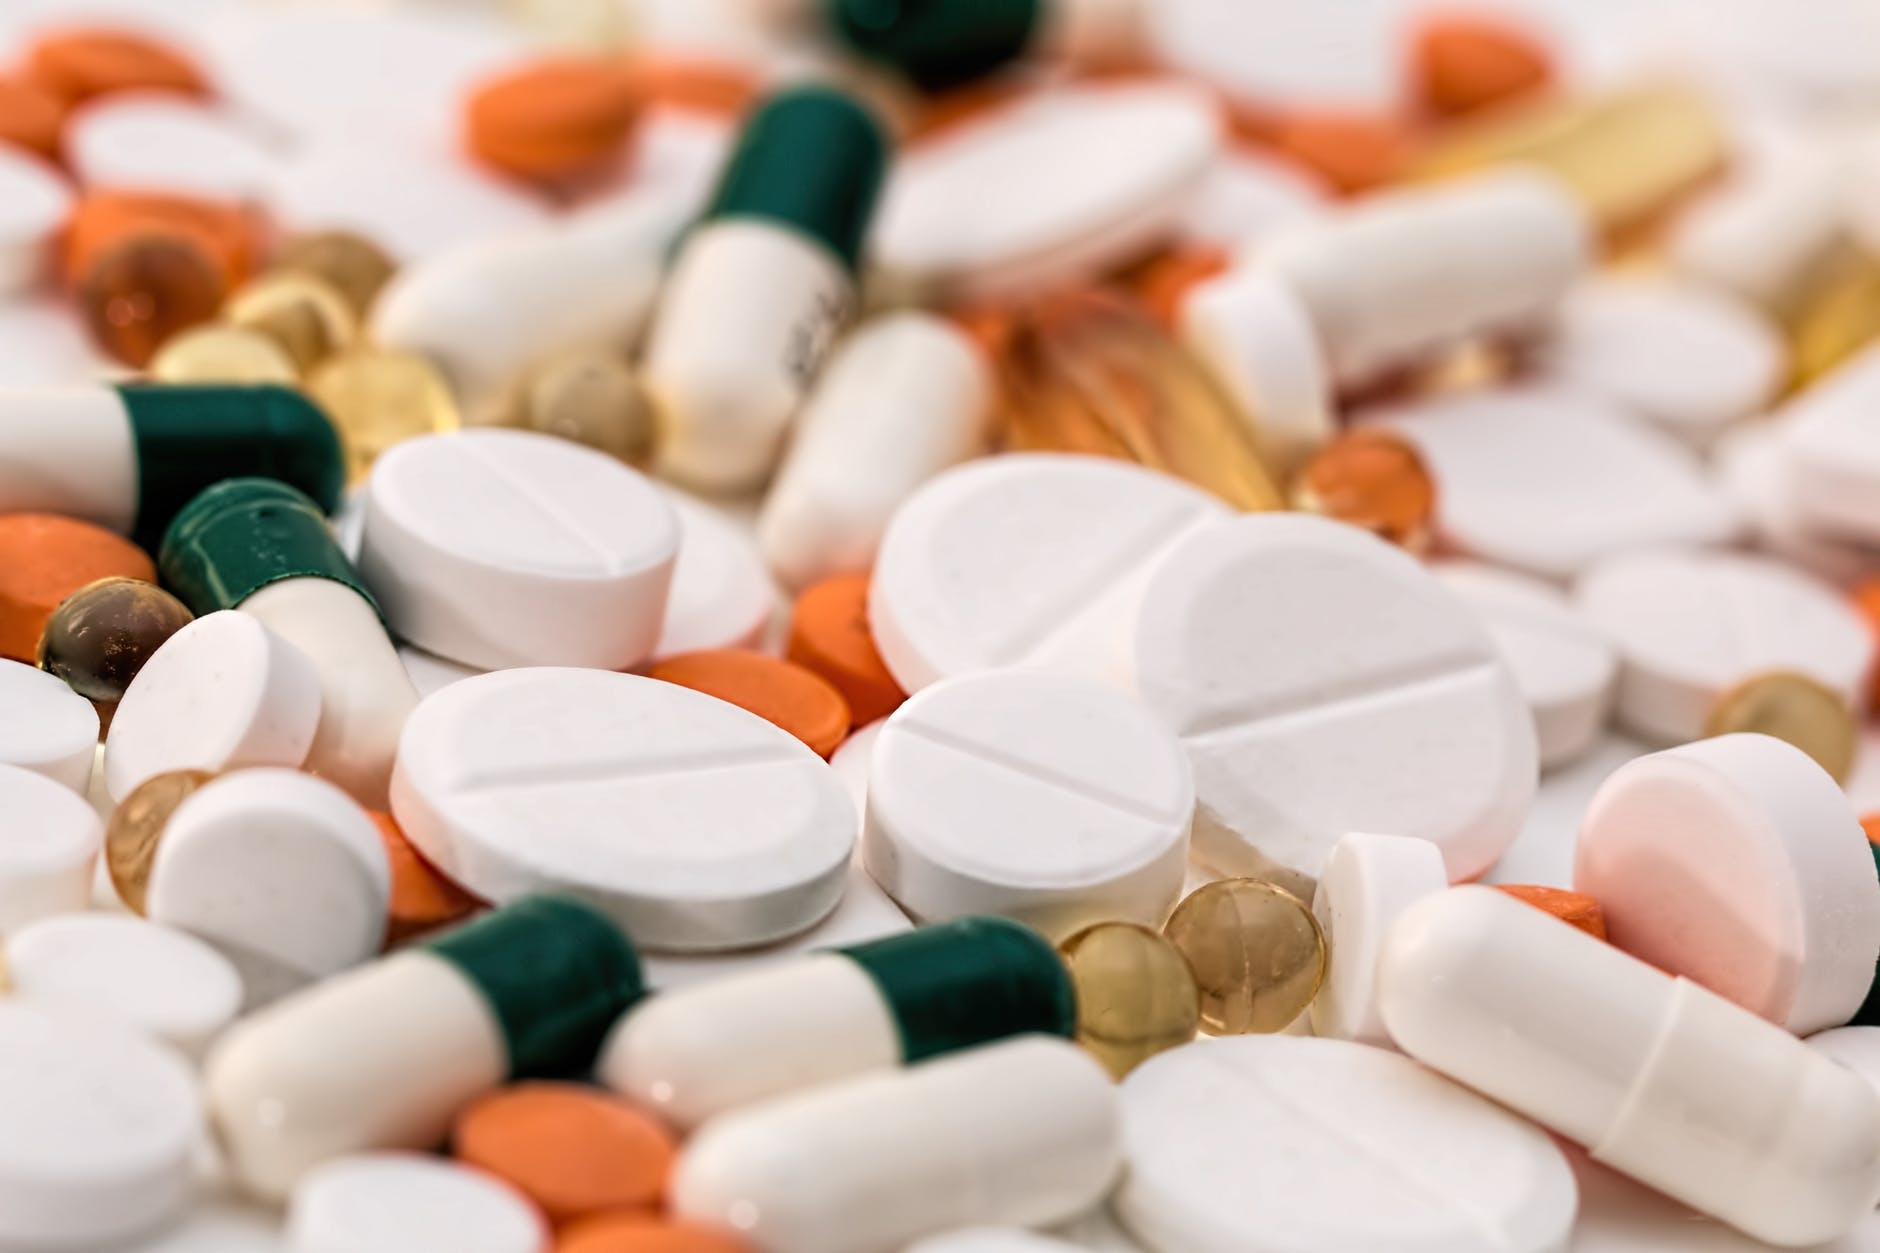 pills and medication as failed healthcare